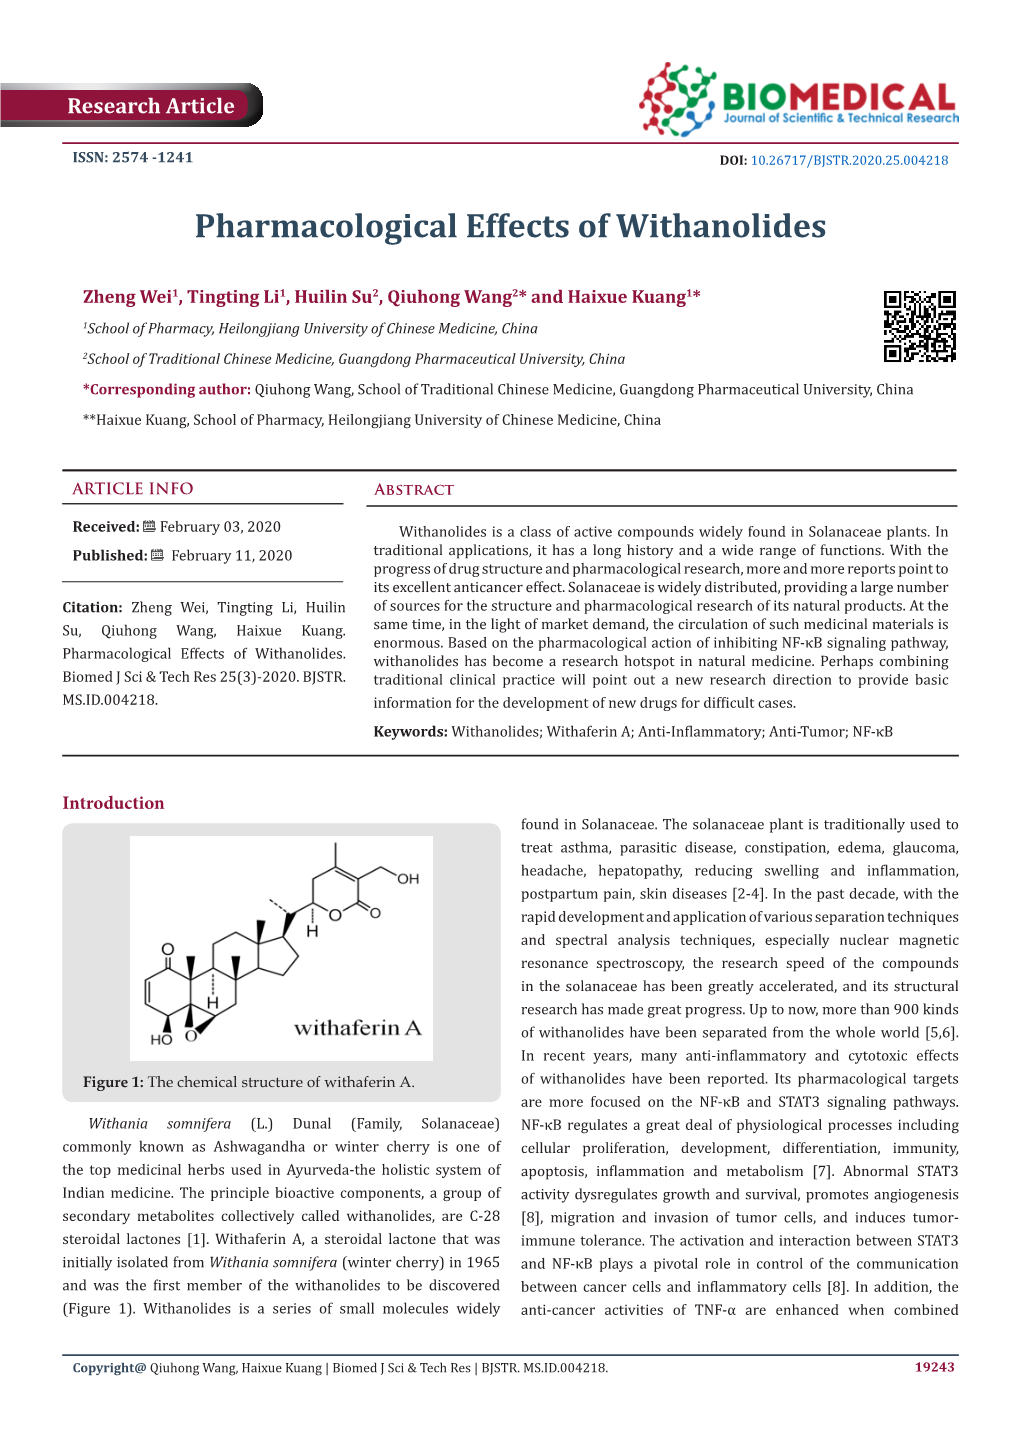 Pharmacological Effects of Withanolides